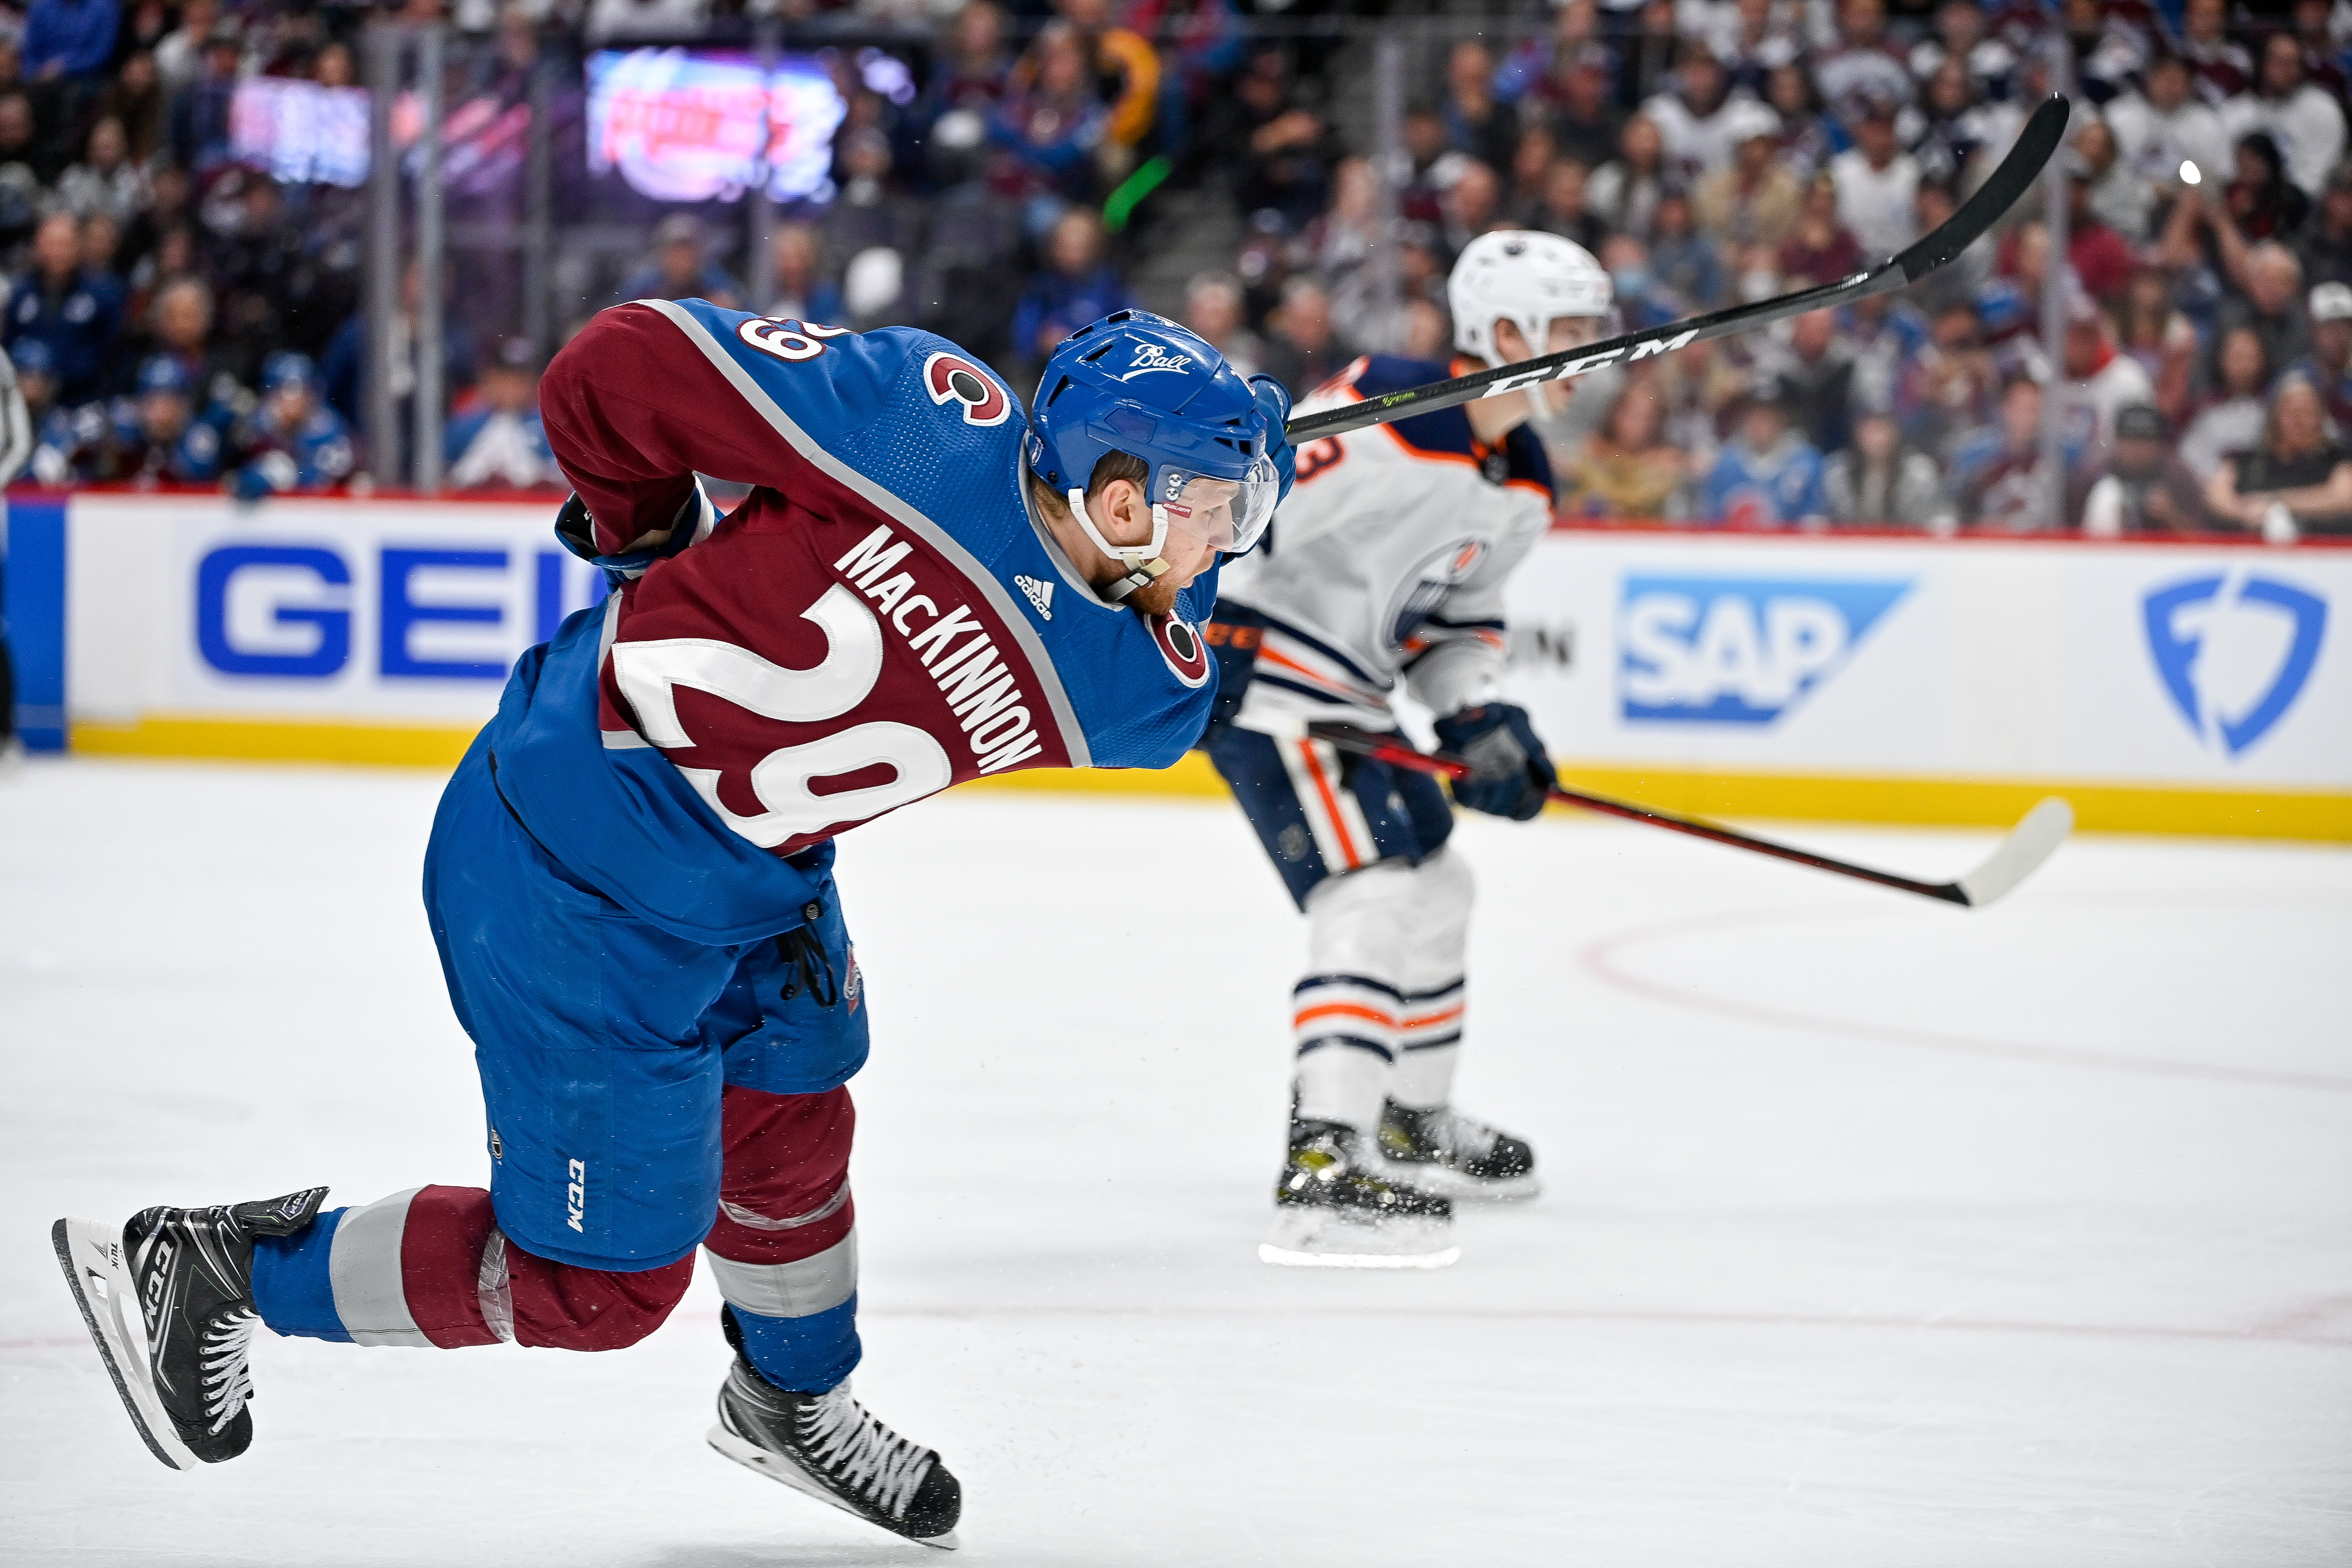 &nbsp;Colorado Avalanche center Nathan MacKinnon (29) shoots during a Stanley Cup Playoffs Western Conference Finals game between the Edmonton Oilers and the Colorado Avalanche at Ball Arena in Denver, Colorado on May 31, 2022.